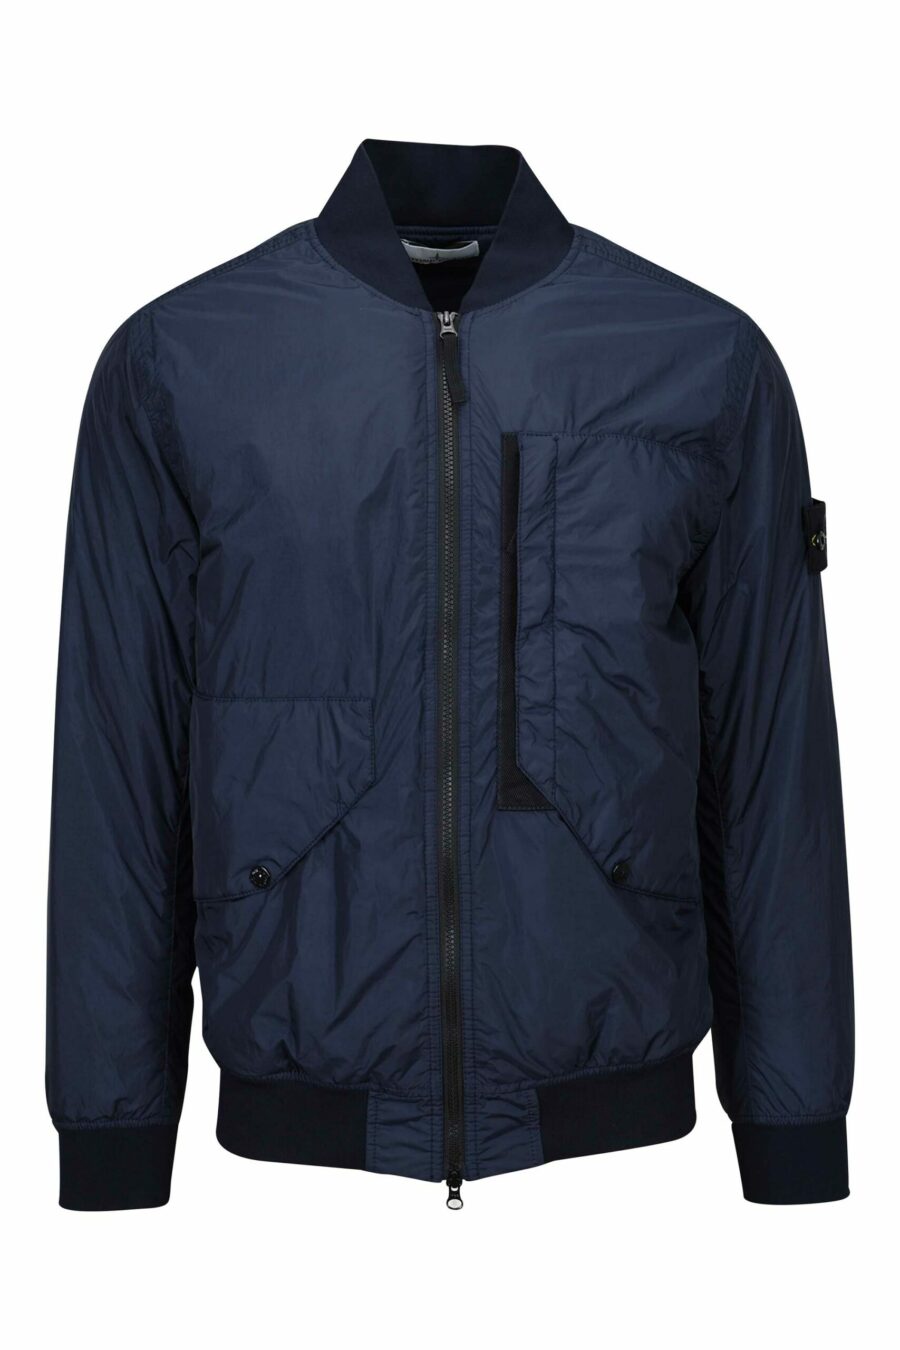 Blue jacket with logo side patch - 8052572762185 scaled